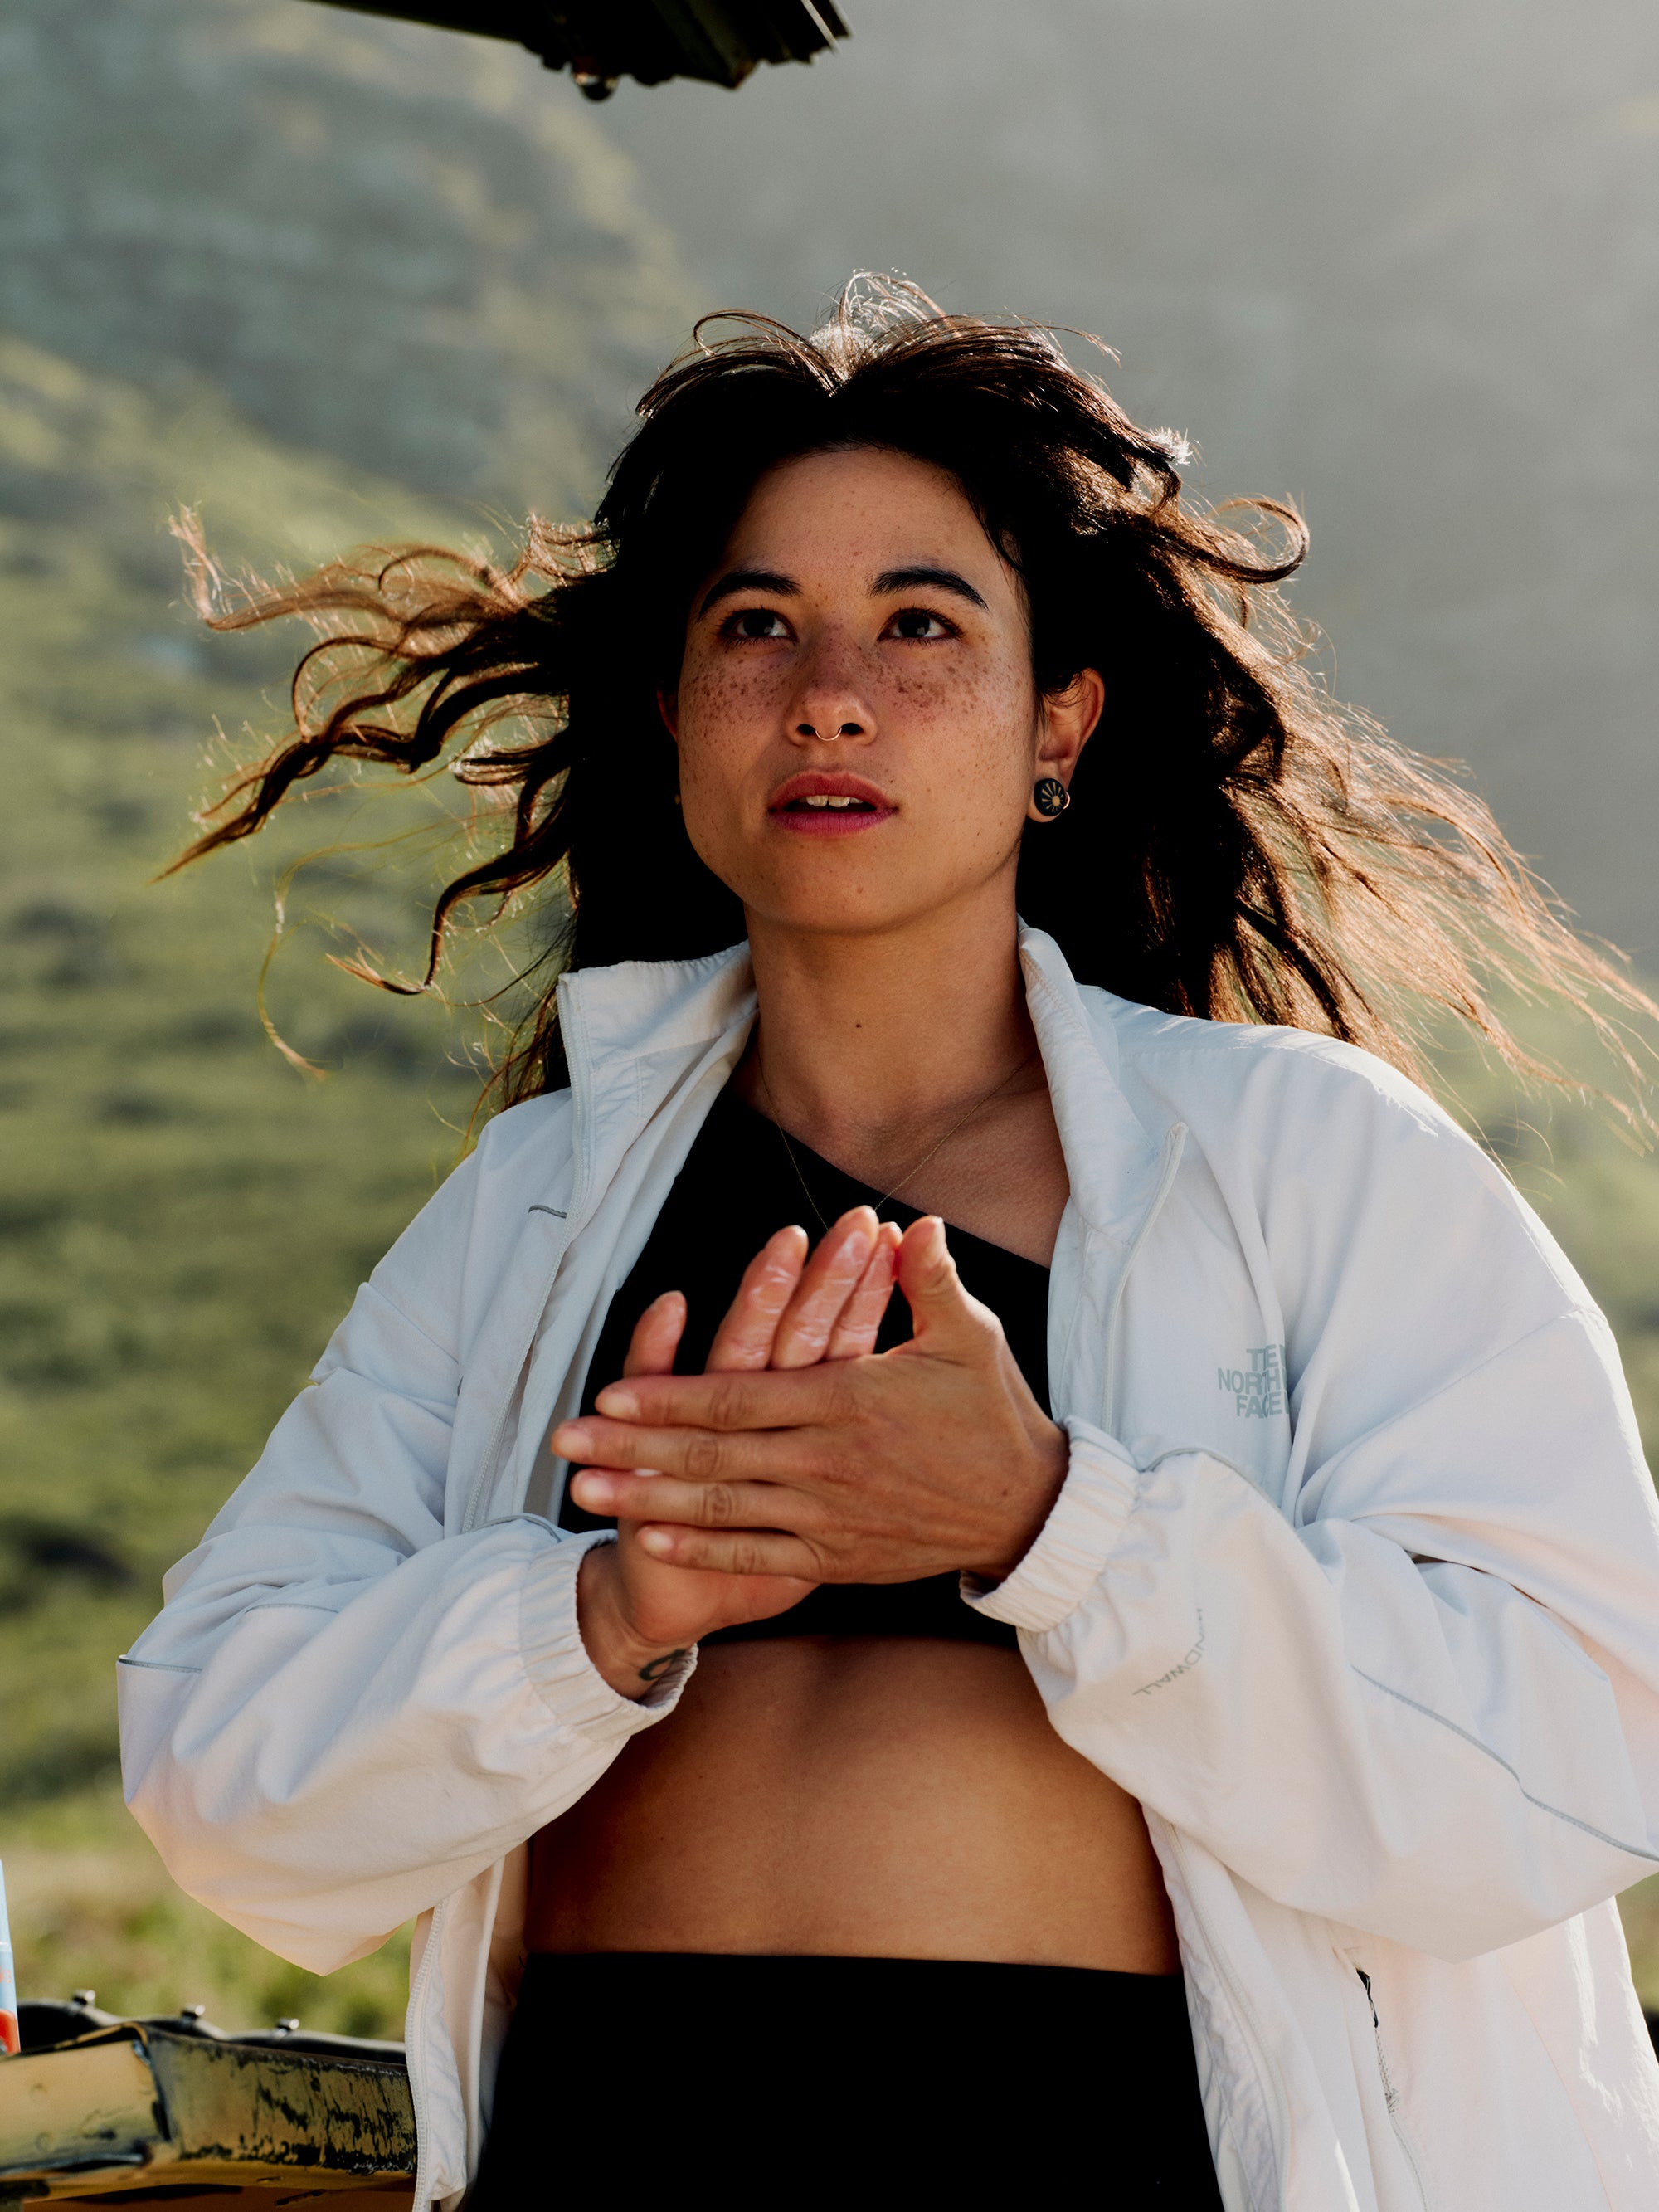 A person stands outdoors with a mountainous background, wearing a white jacket over a black top. Their long hair is flowing in the wind, and they are looking up slightly while clasping their hands together, enjoying the bright and sunny day. They protect their skin with Daily System from Freaks of Nature Skincare for lasting freshness.